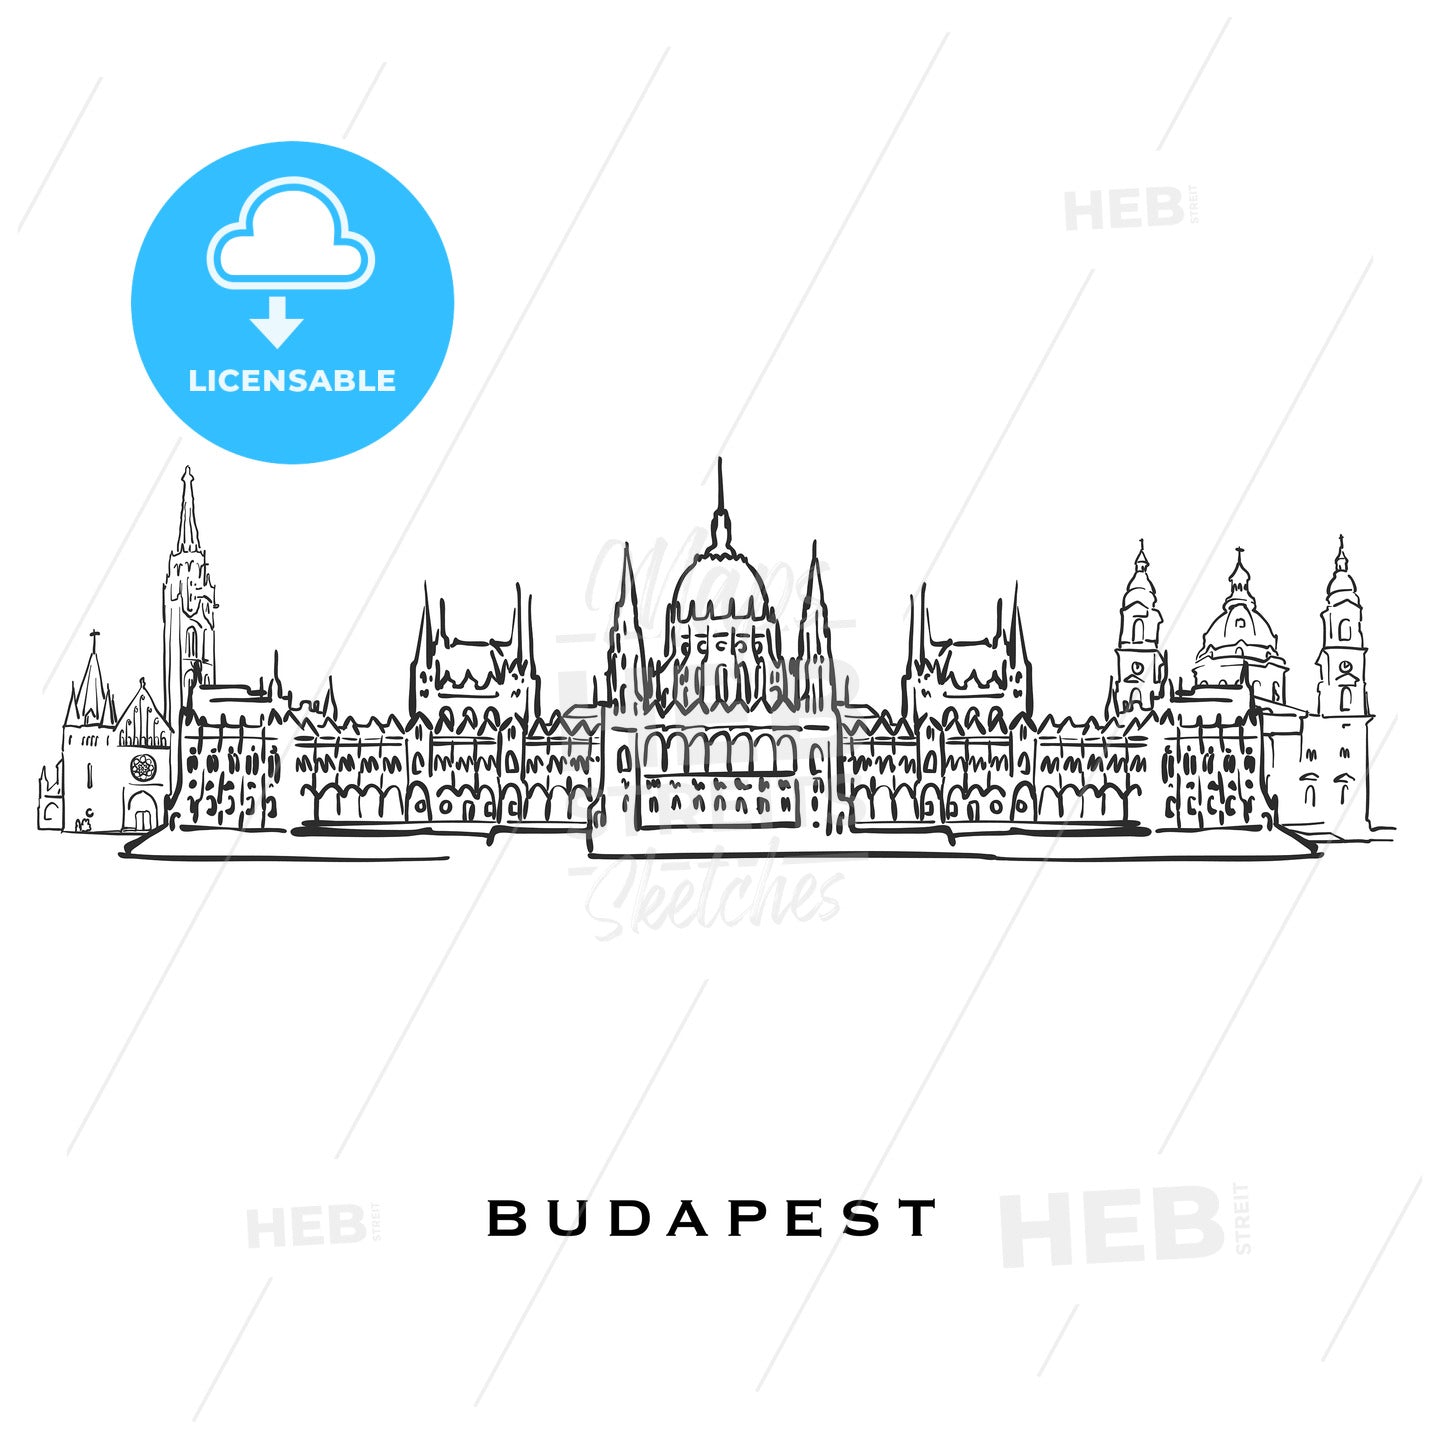 Budapest Hungary famous architecture – instant download